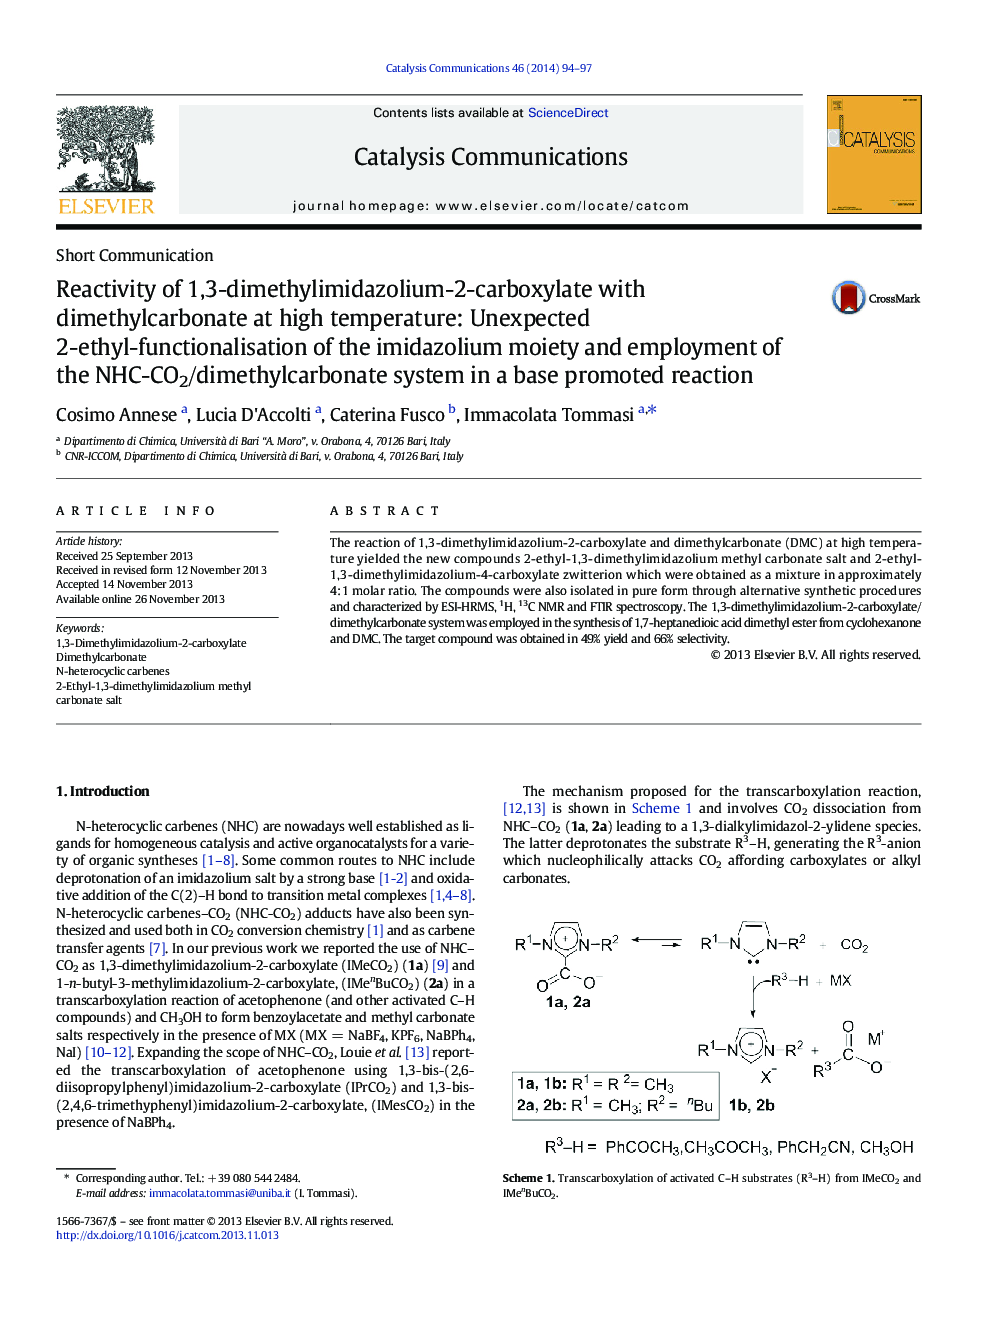 Reactivity of 1,3-dimethylimidazolium-2-carboxylate with dimethylcarbonate at high temperature: Unexpected 2-ethyl-functionalisation of the imidazolium moiety and employment of the NHC-CO2/dimethylcarbonate system in a base promoted reaction